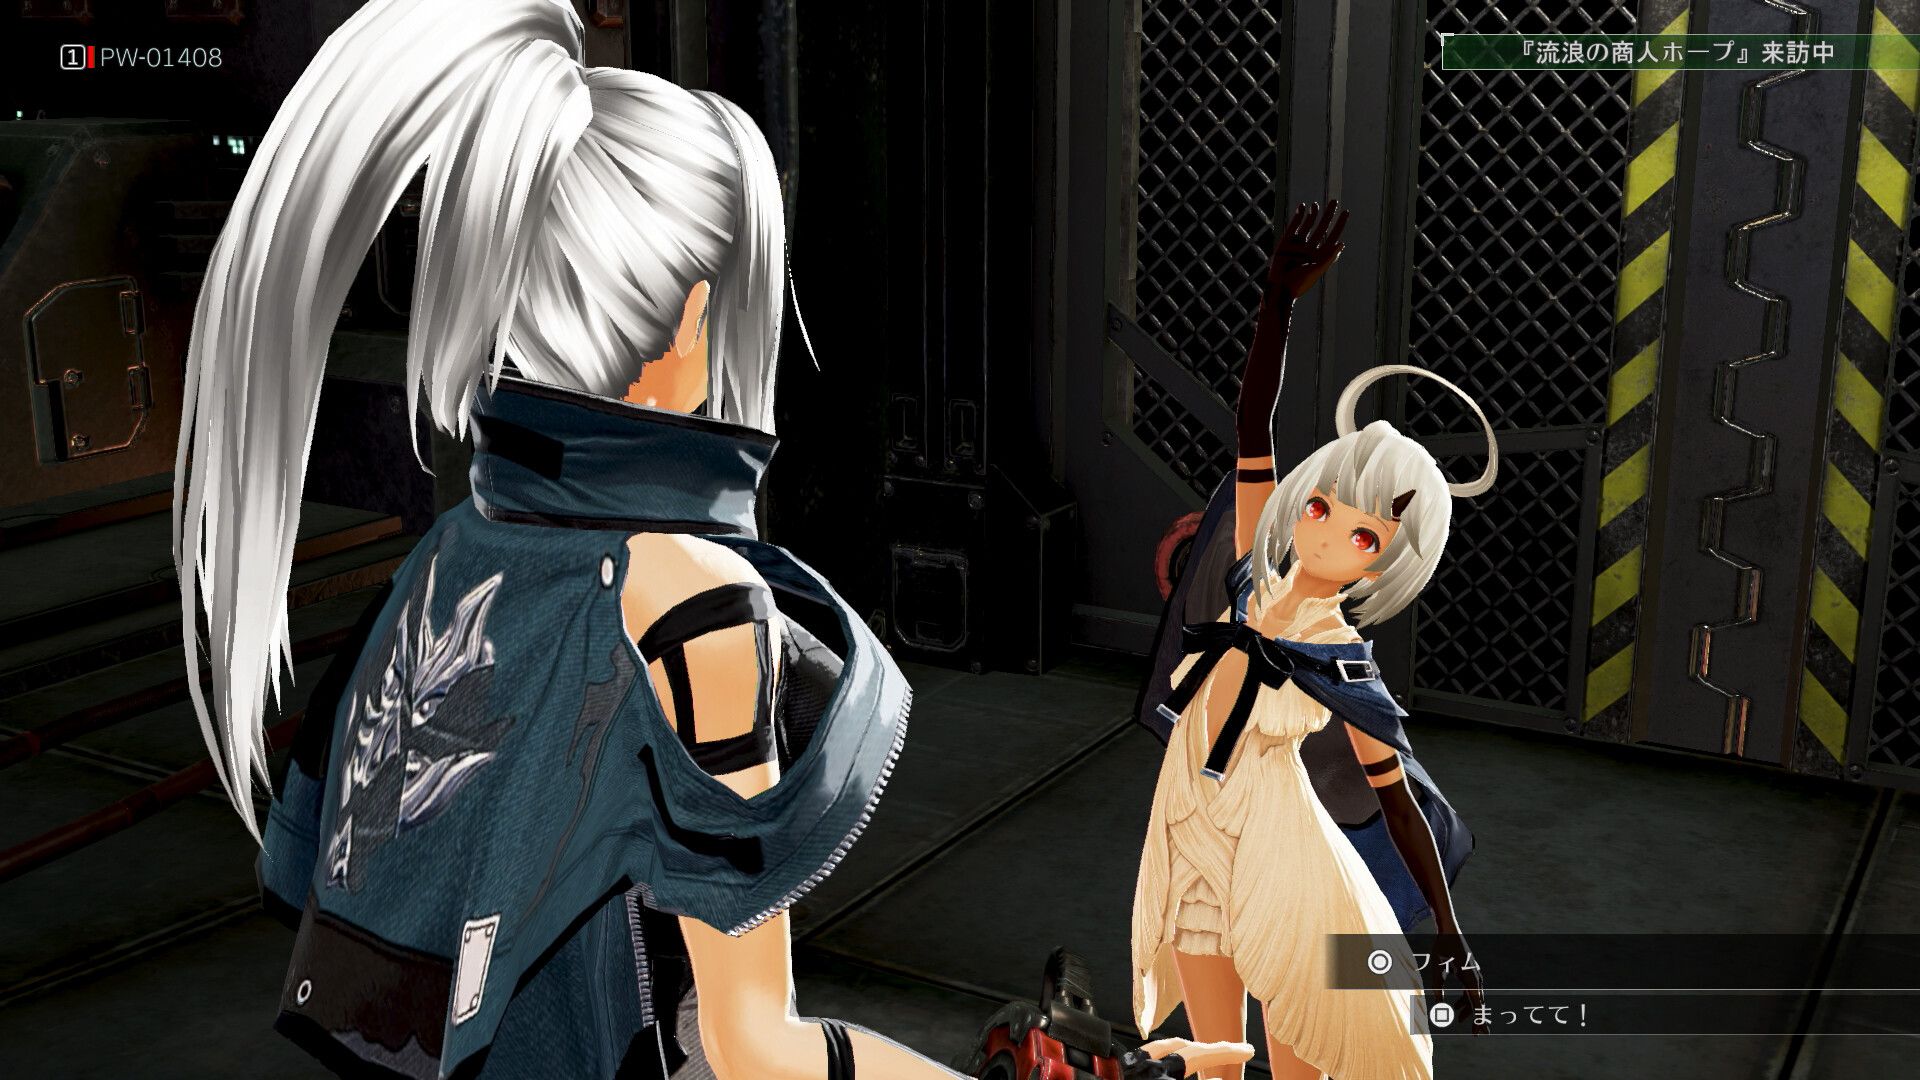 Erotic swimsuit costume for the female hero is added in the free update of [God Eater 3]! 3